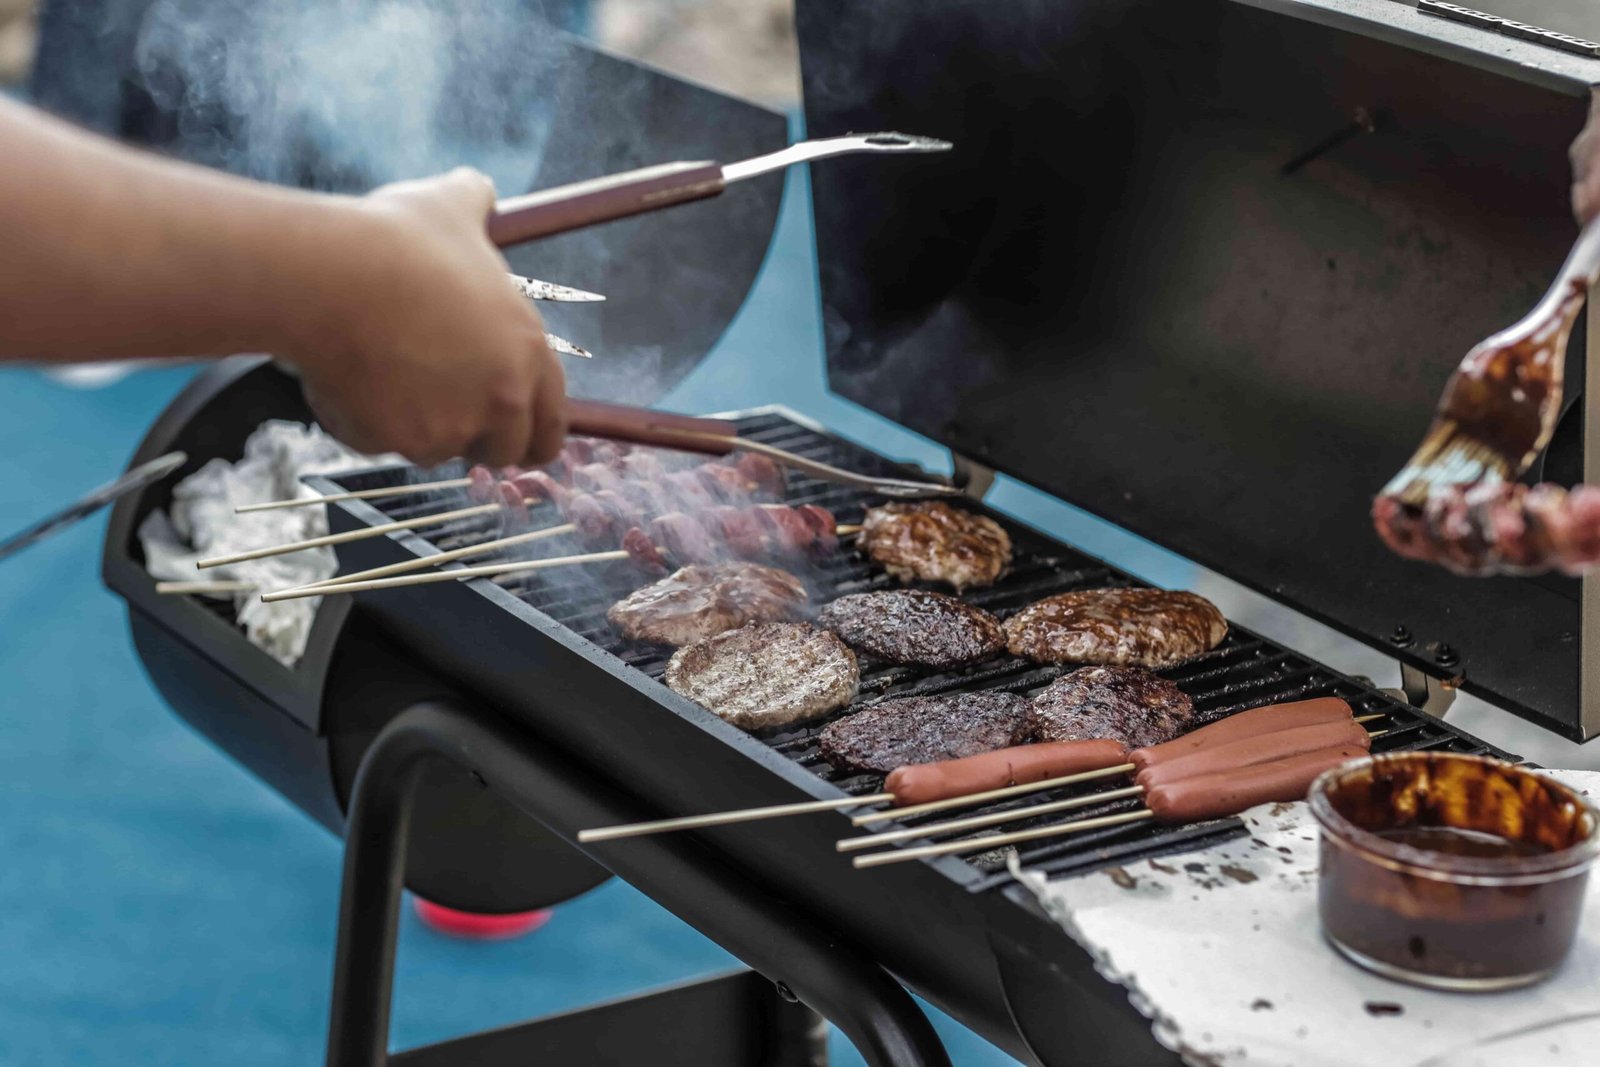 Some Key Benefits of Charcoal BBQ Over Electric